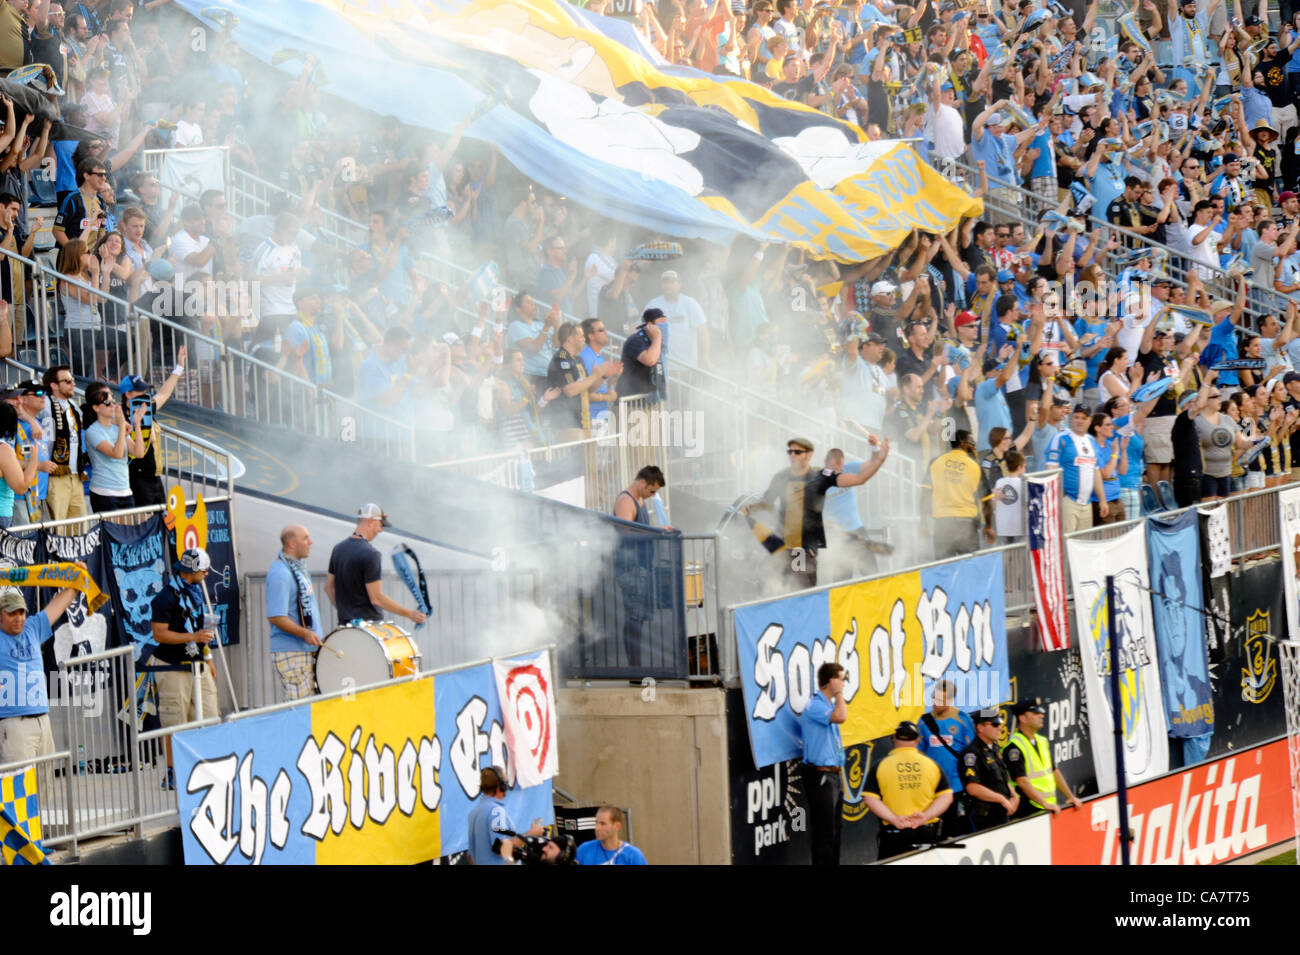 Philadelphia, USA. 23 June, 2012. Philadelphia Union fans and the Sons of Ben celebrate a goal with drums / smoke / tifo during a professional MLS soccer / football match against the Sporting KC of Kansas City. Stock Photo